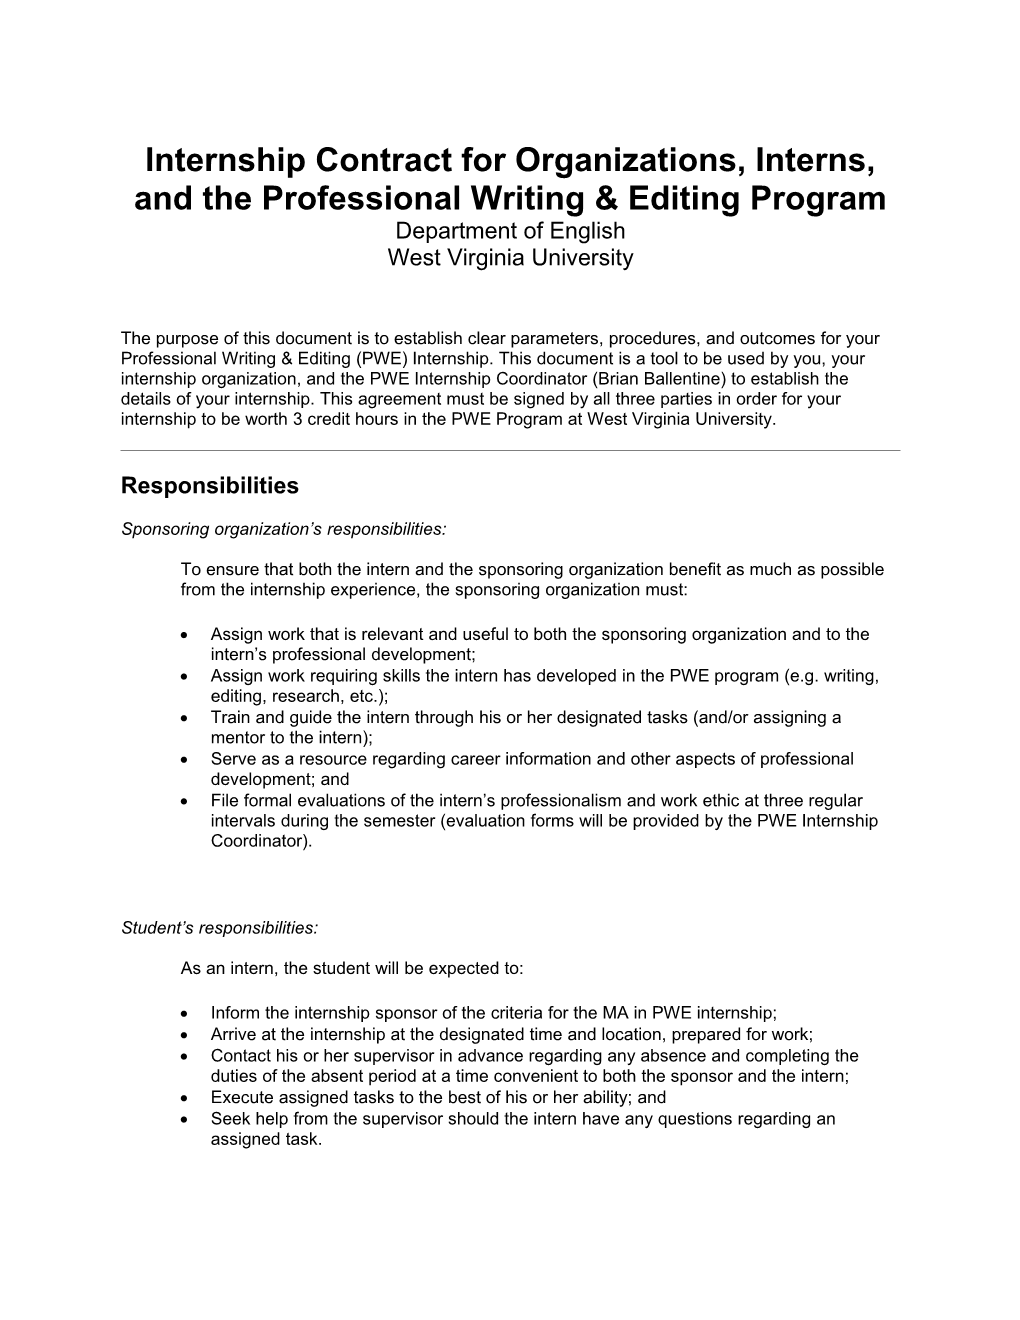 Internship Contract for Organizations, Interns, and the Professional Writing Program